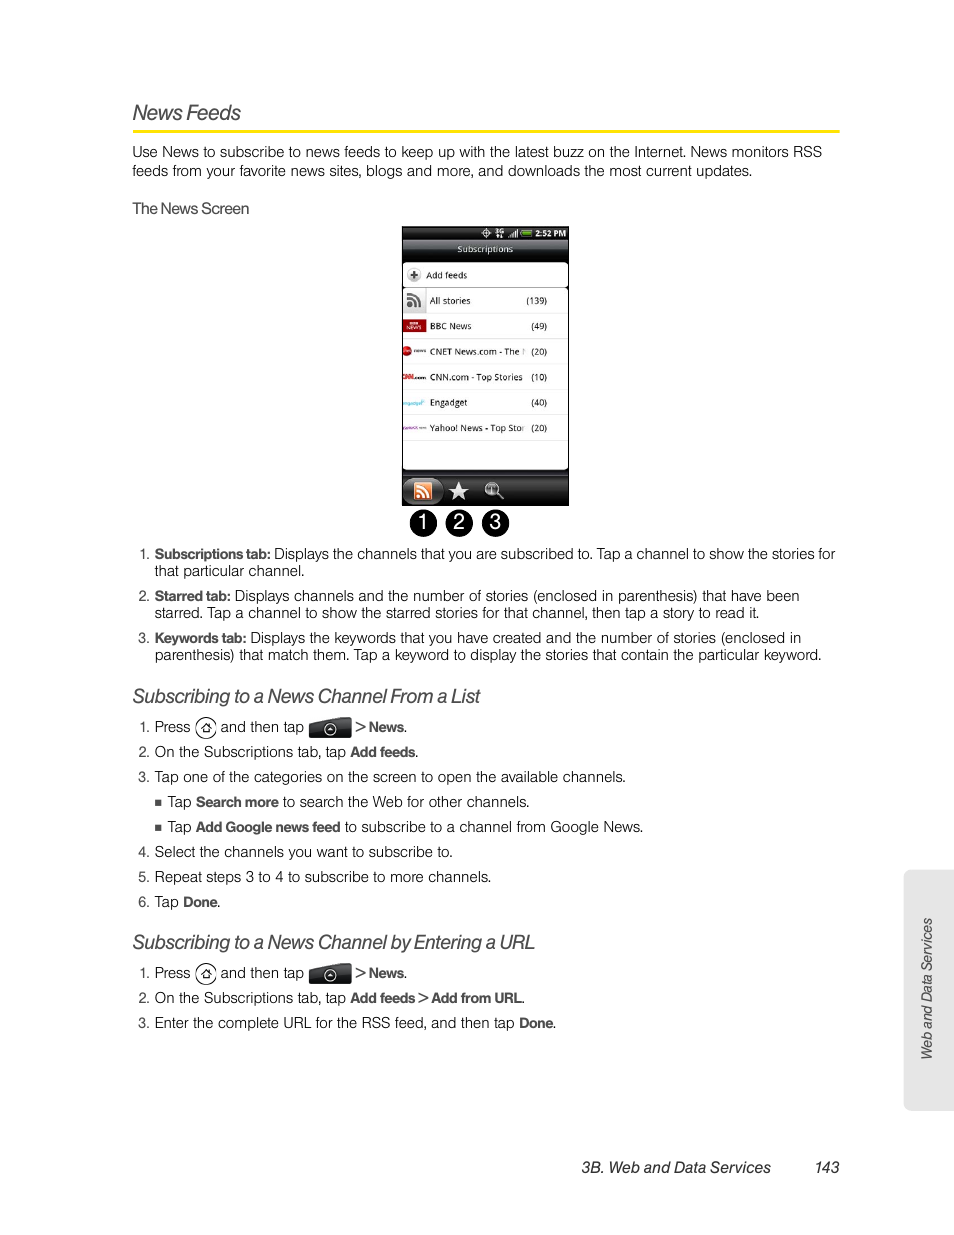 News feeds, Subscribing to a news channel from a list, Subscribing to a news channel by entering a url | HTC EVO 4G User Manual | Page 153 / 197